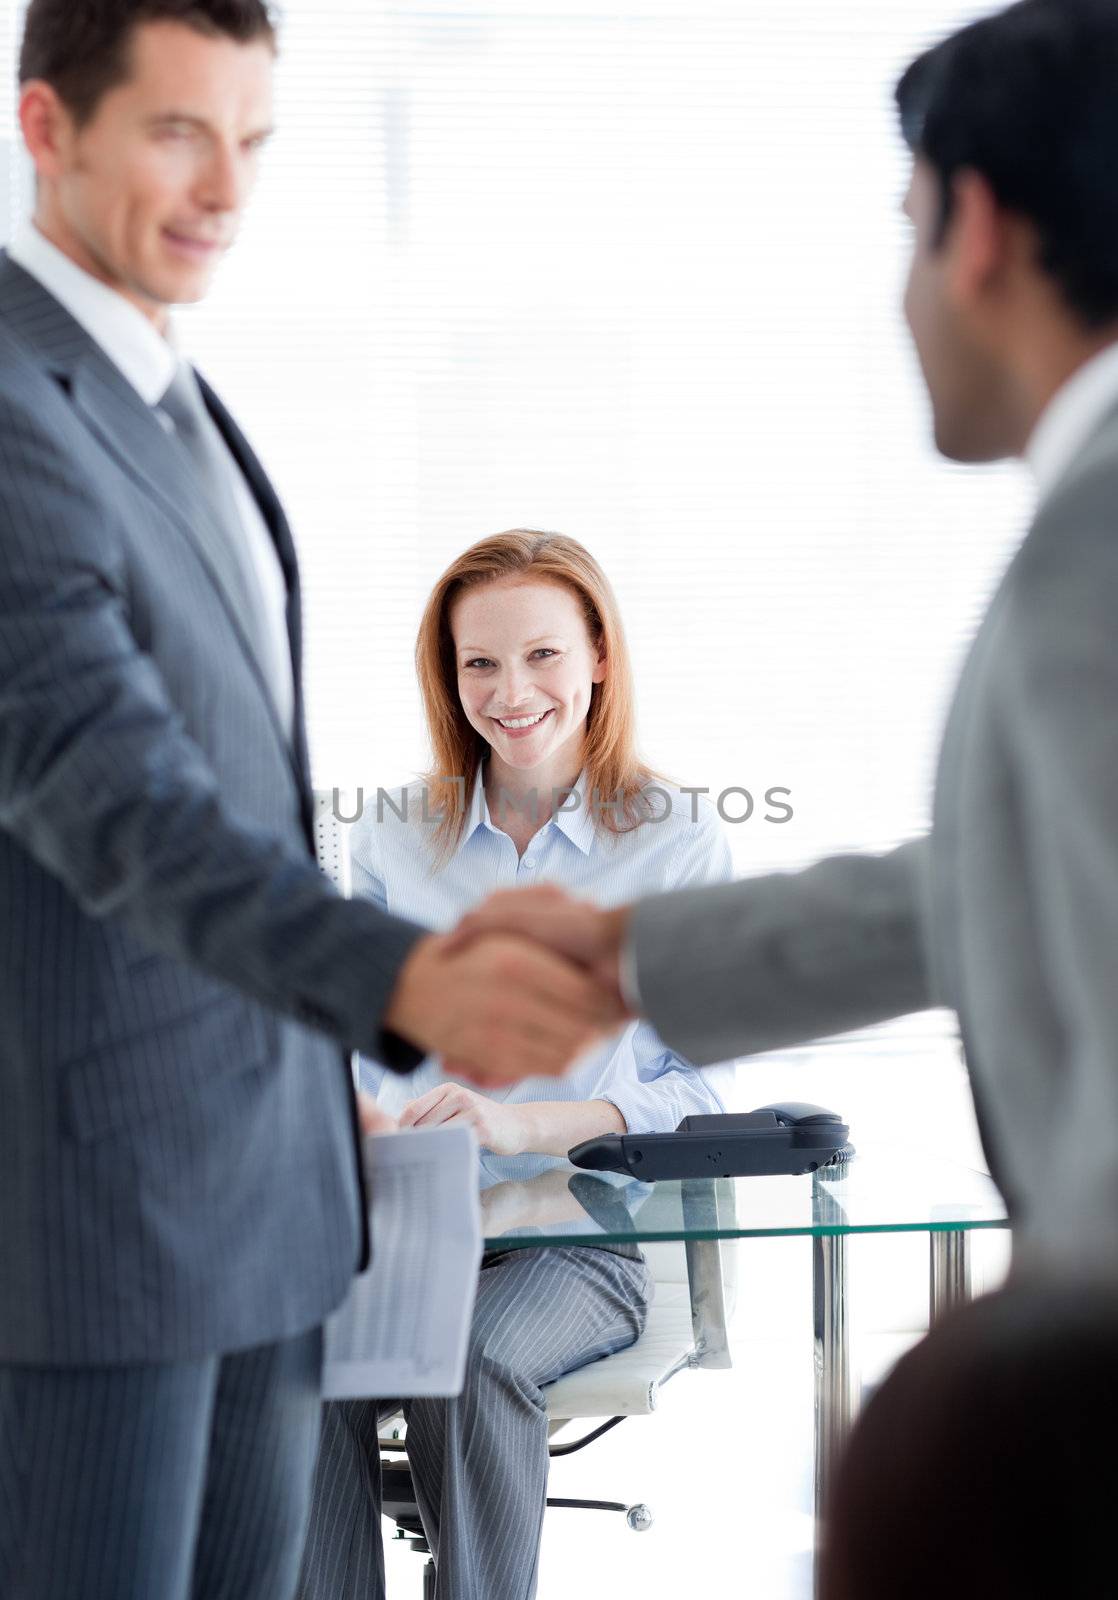 International businessmen greeting each other at a job interview in an office